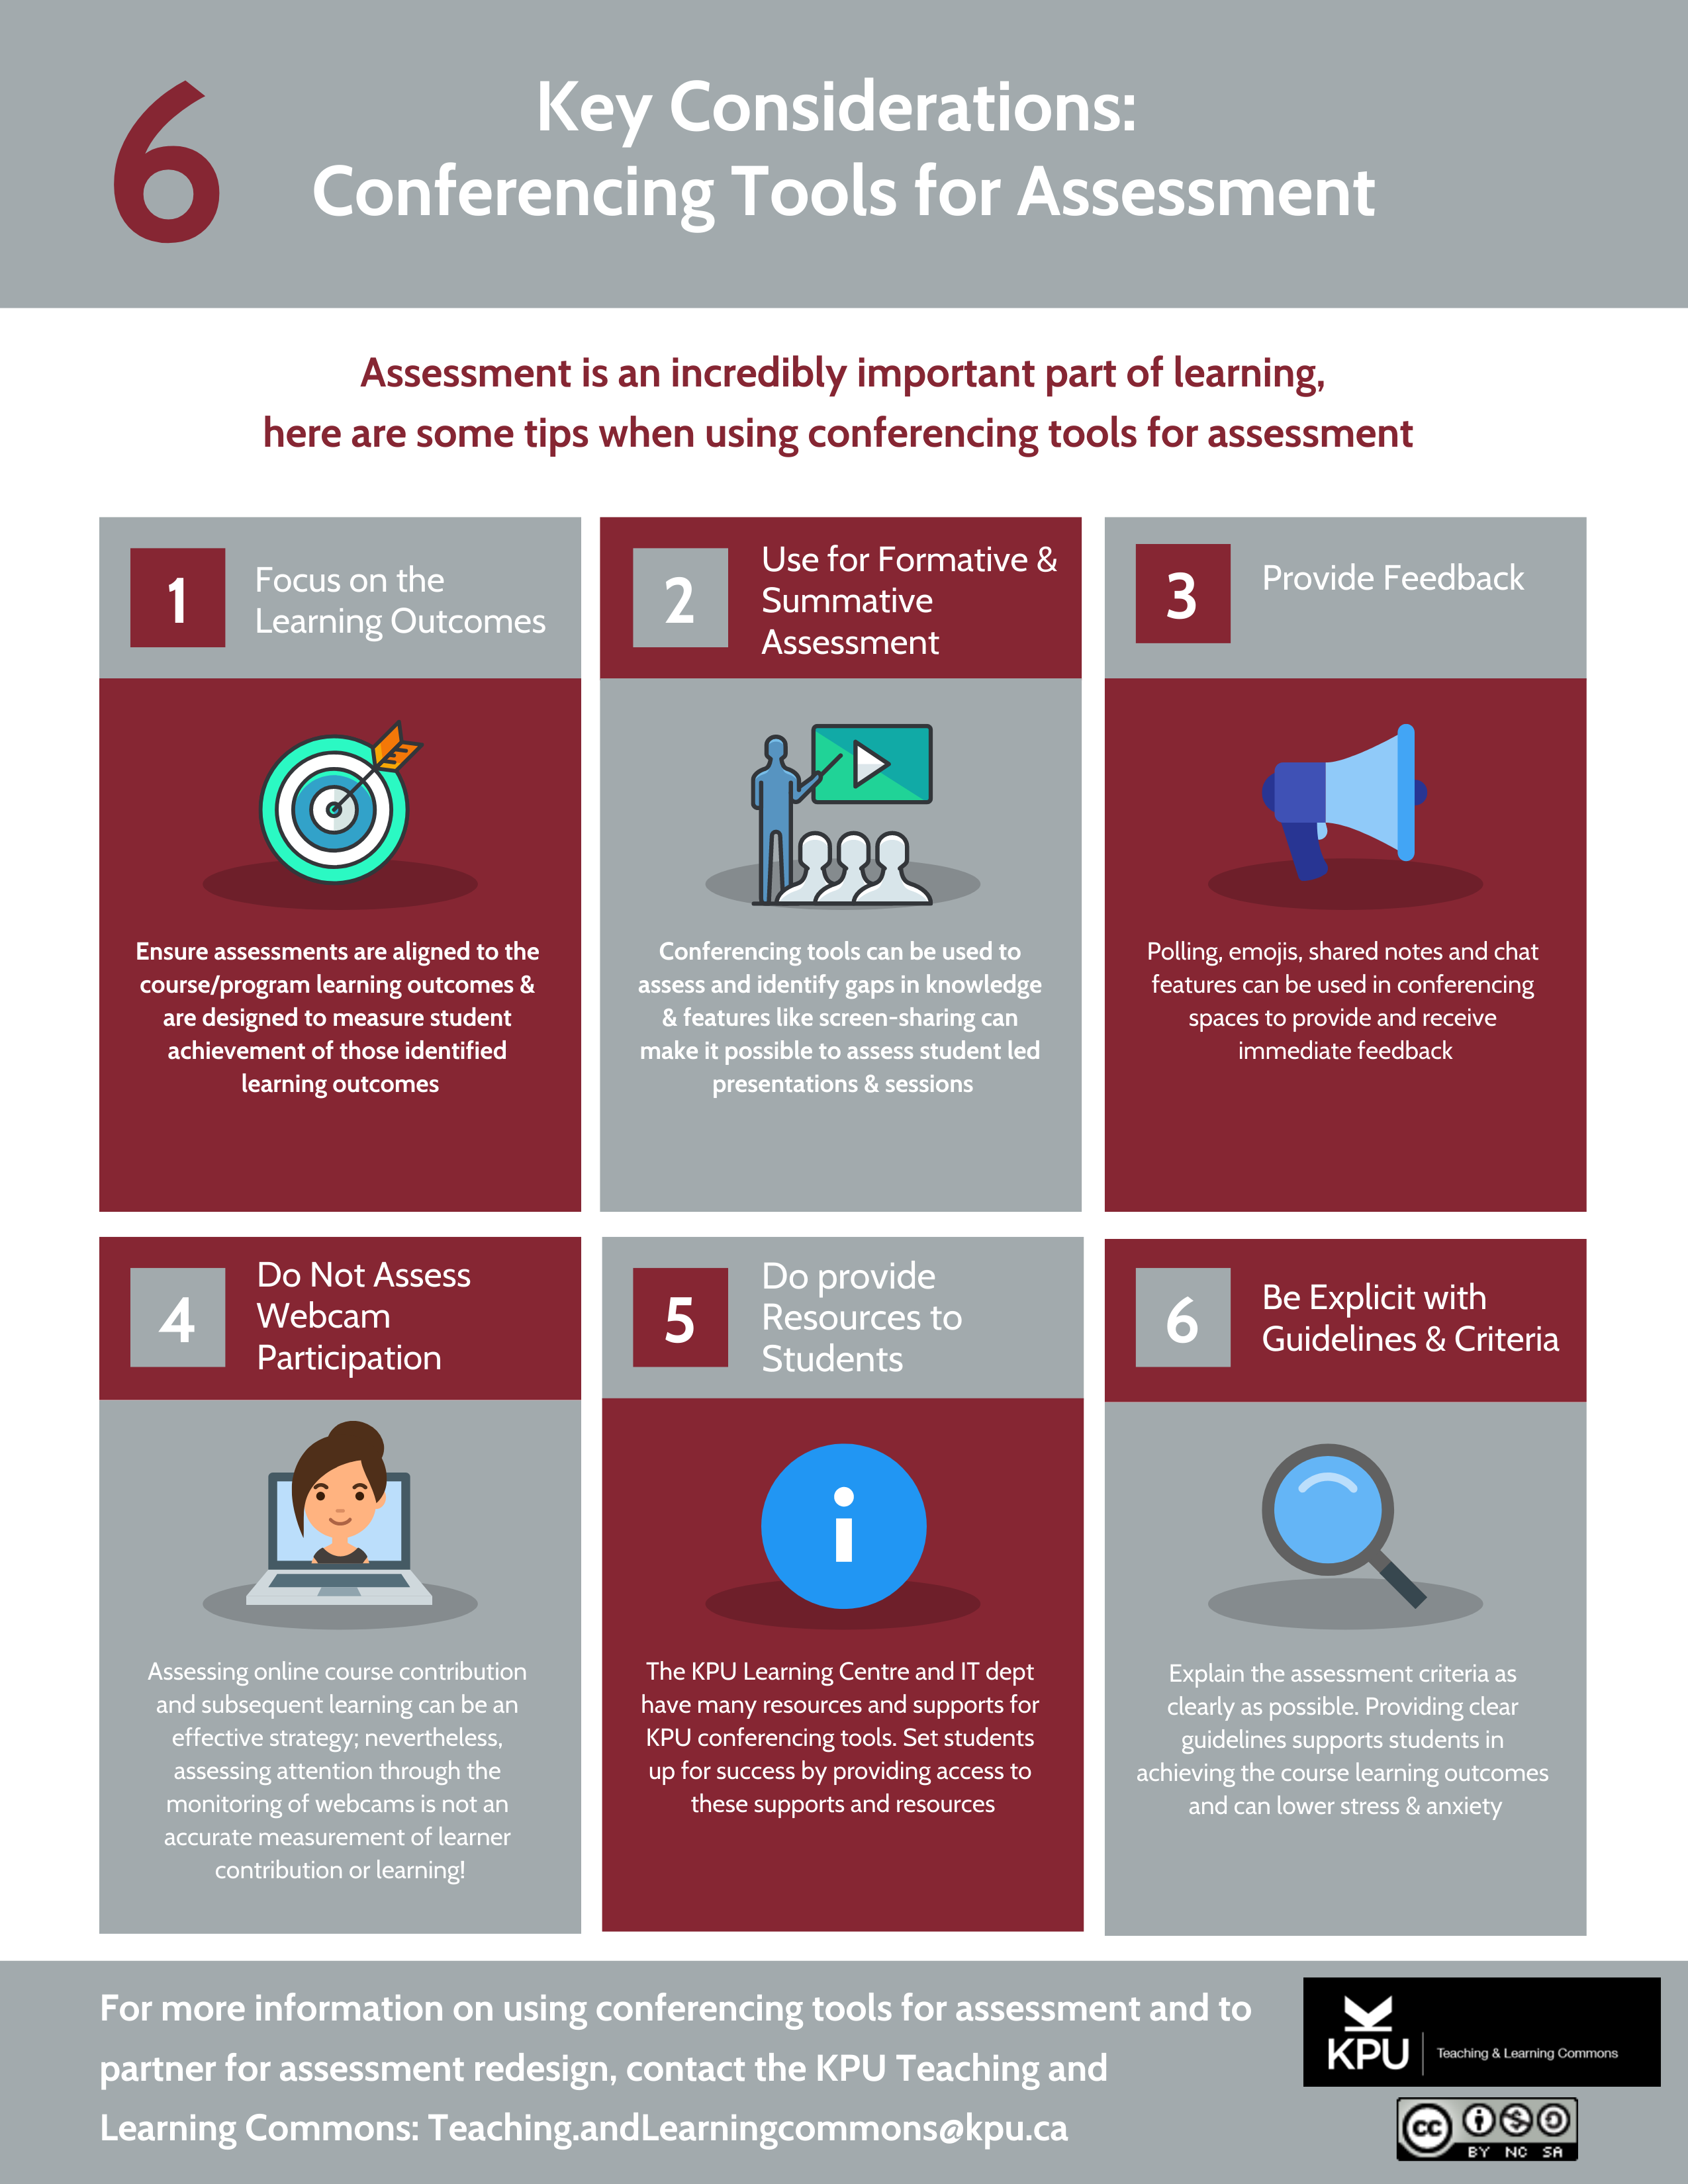 An infographic depicting 6 key considerations when using conferencing tools for assessment